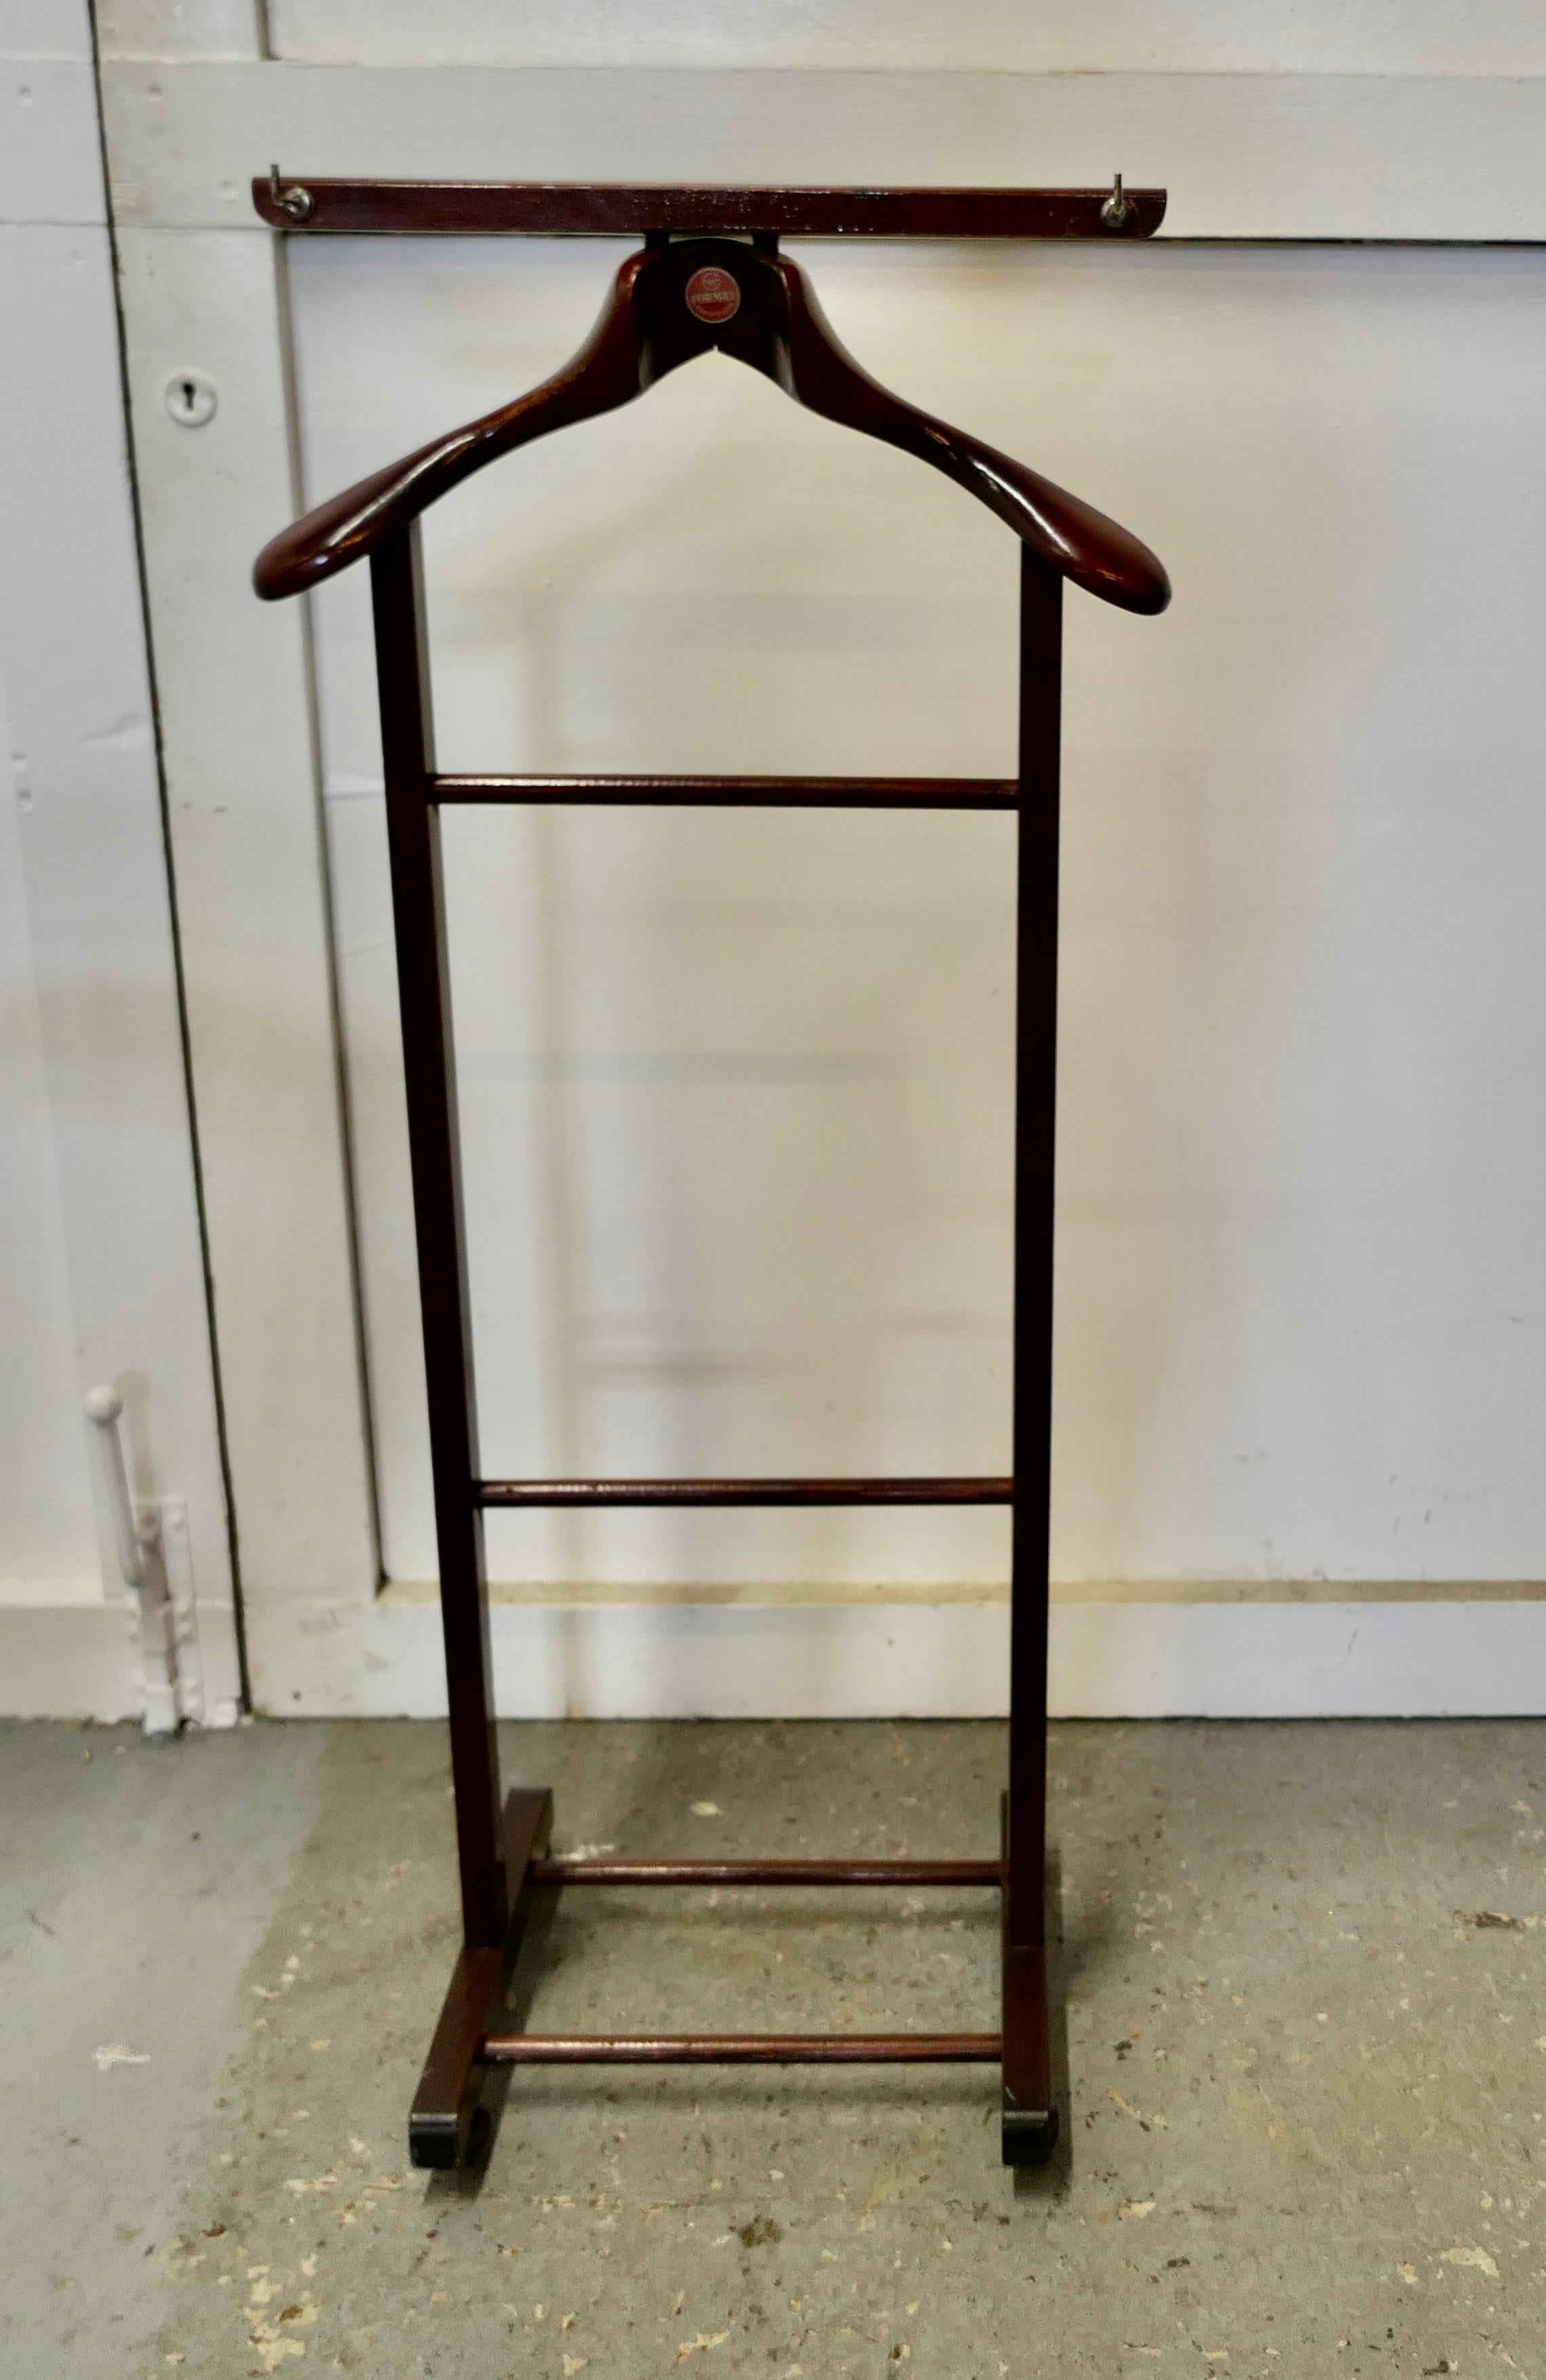 Art Deco floor standing suit hanger, Formax Valet by Brevete

 A very useful piece, the hanger or Valet is made in Beech, it will accommodate jacket and trousers, but it would do just as well for your jeans and a jacket overnight or would make an